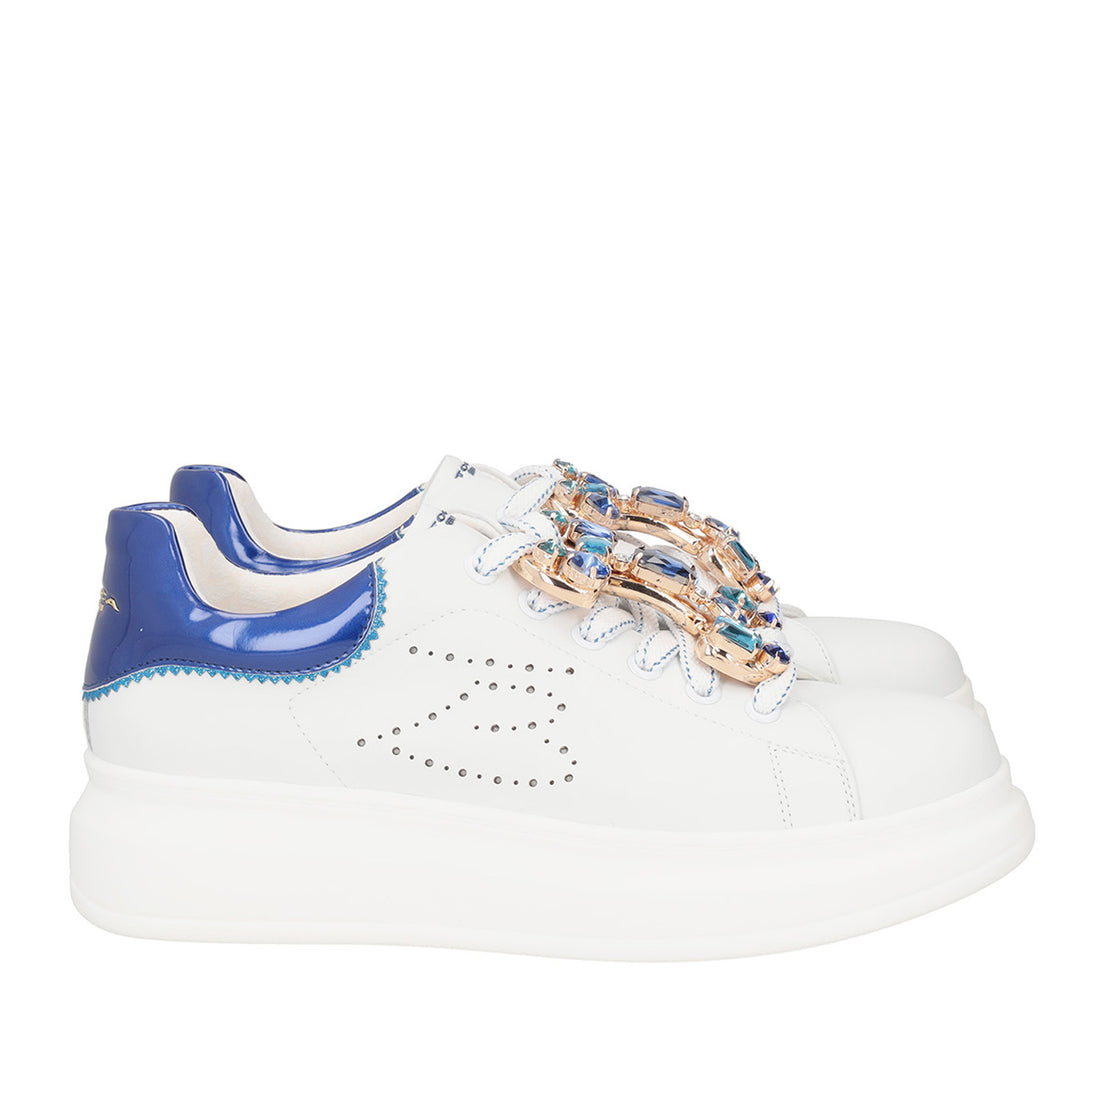 WHITE/BLUETTE GLAMOUR SNEAKER WITH JEWEL ACCESSORY